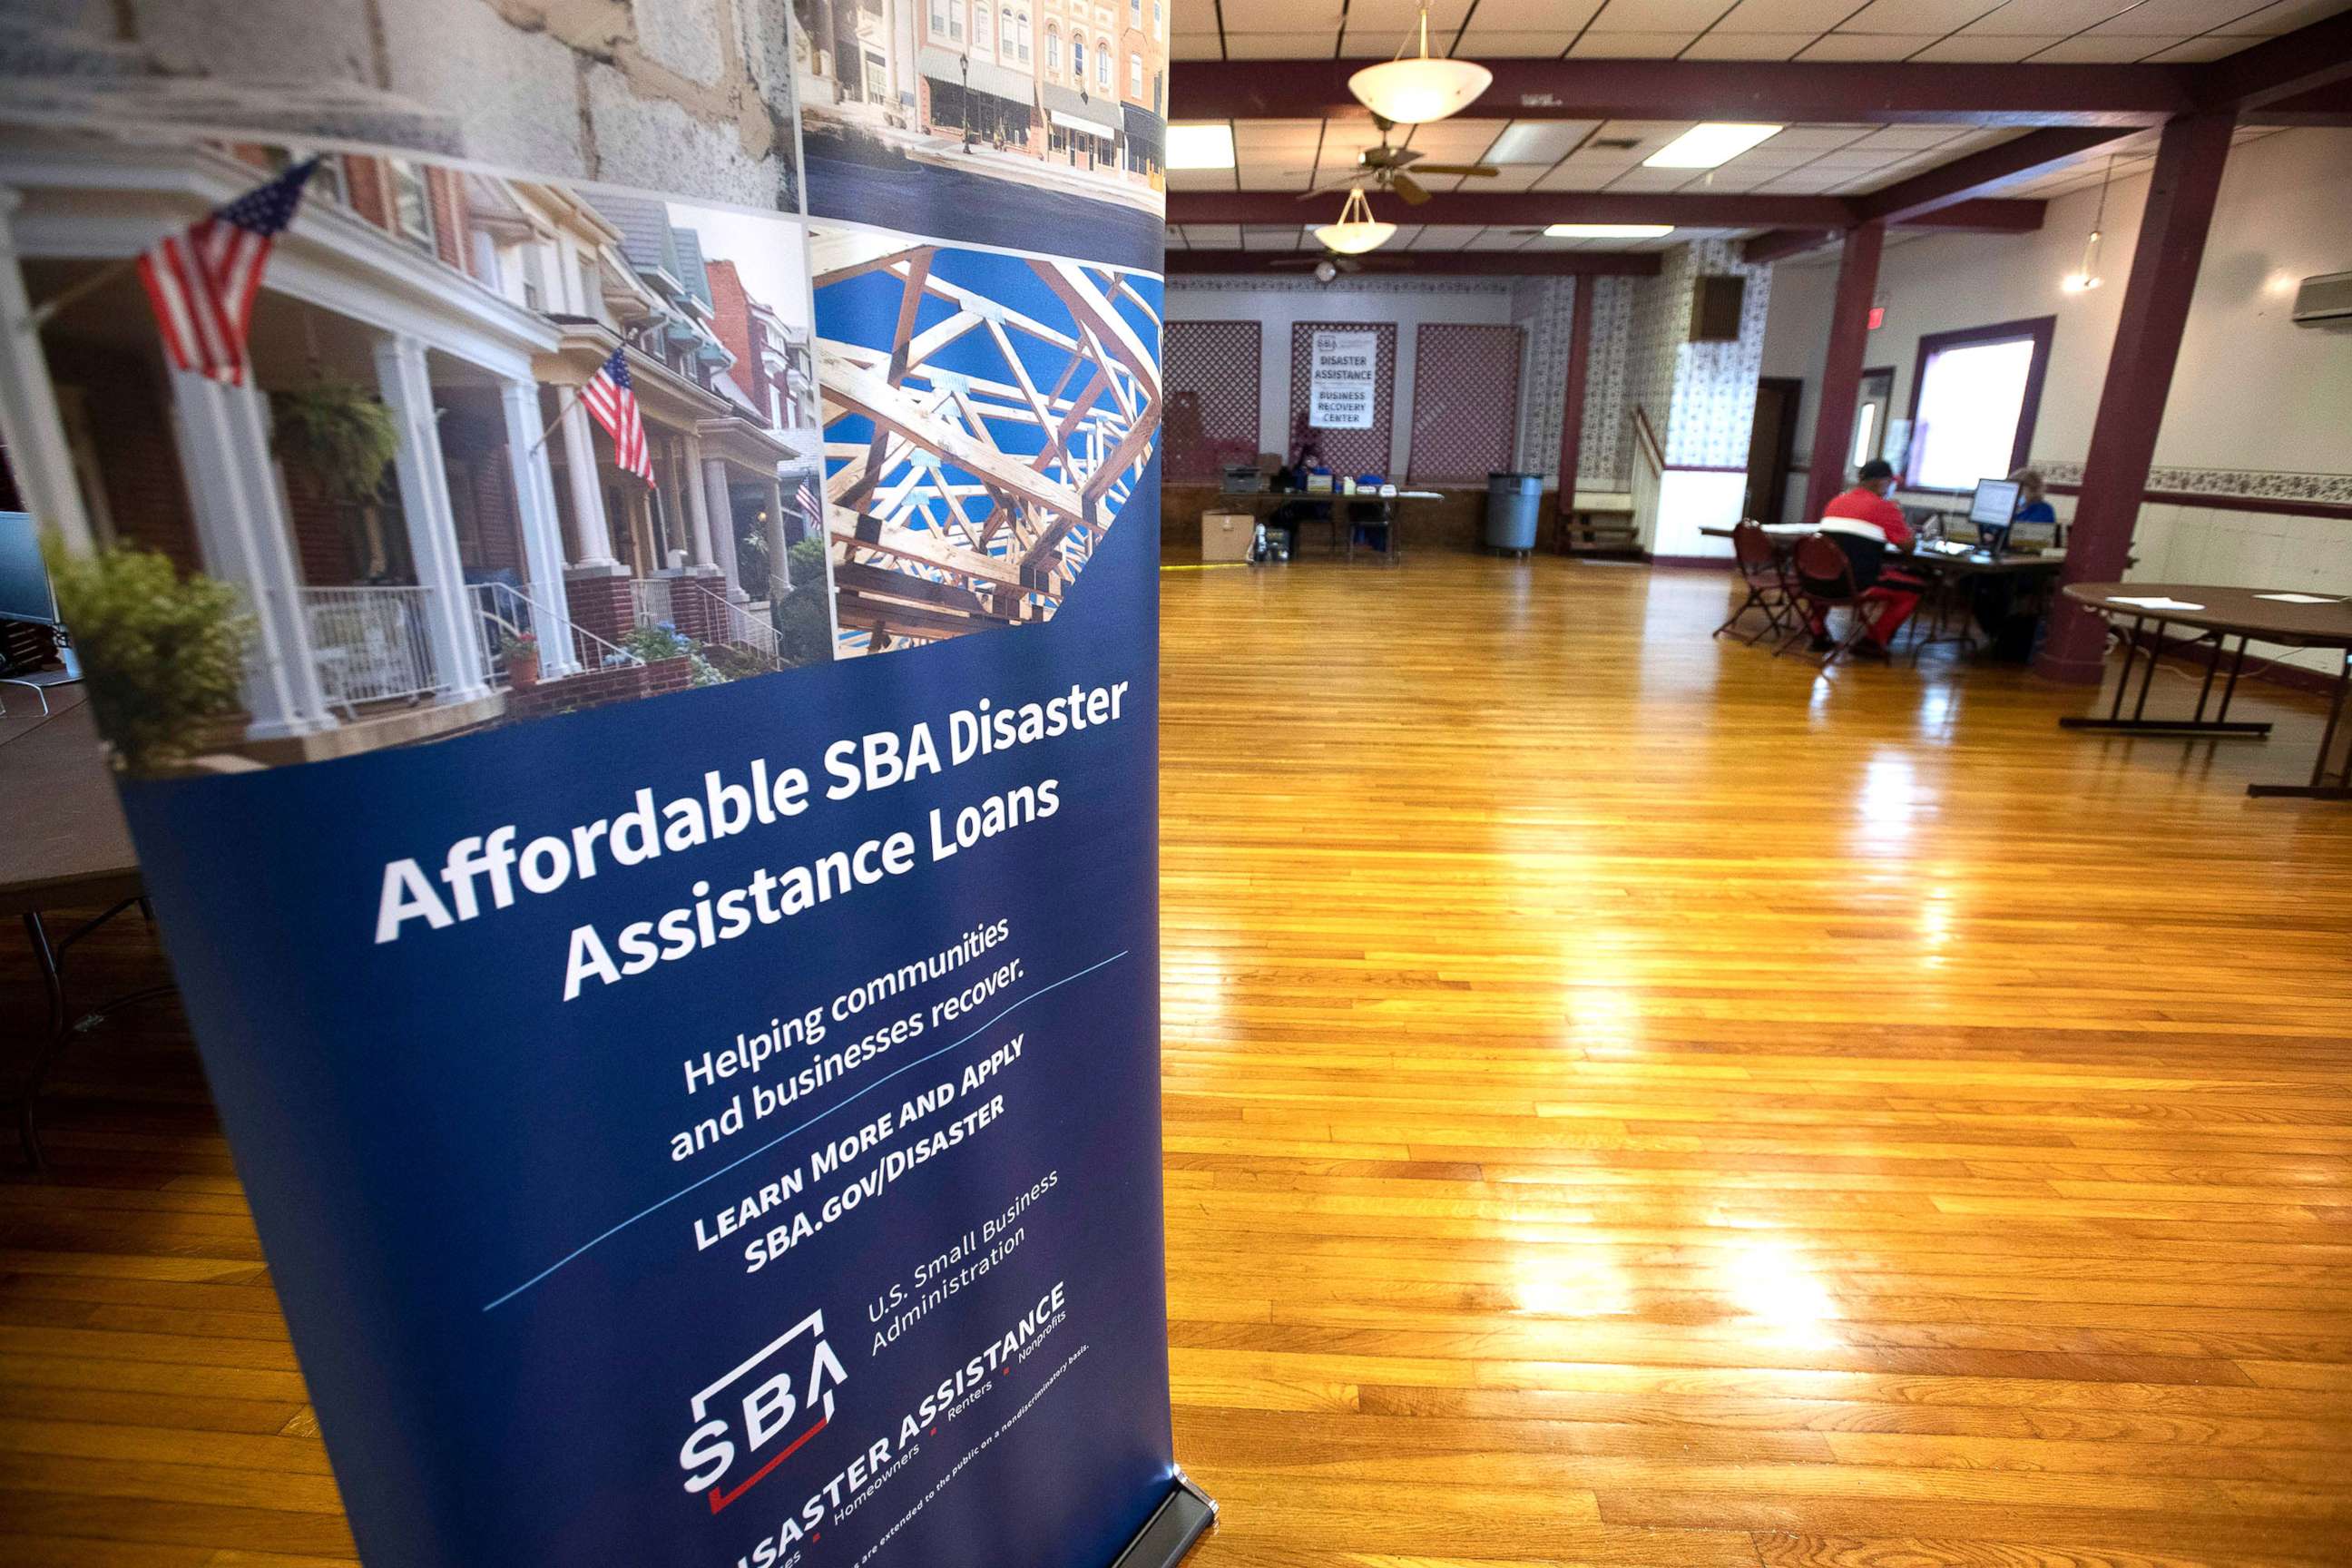 PHOTO: A sign promotes Disaster Assistance Loans issued by the Small Business Administration during the COVID-19 pandemic, on Oct. 30, 2020, in Pensacola, Fla.